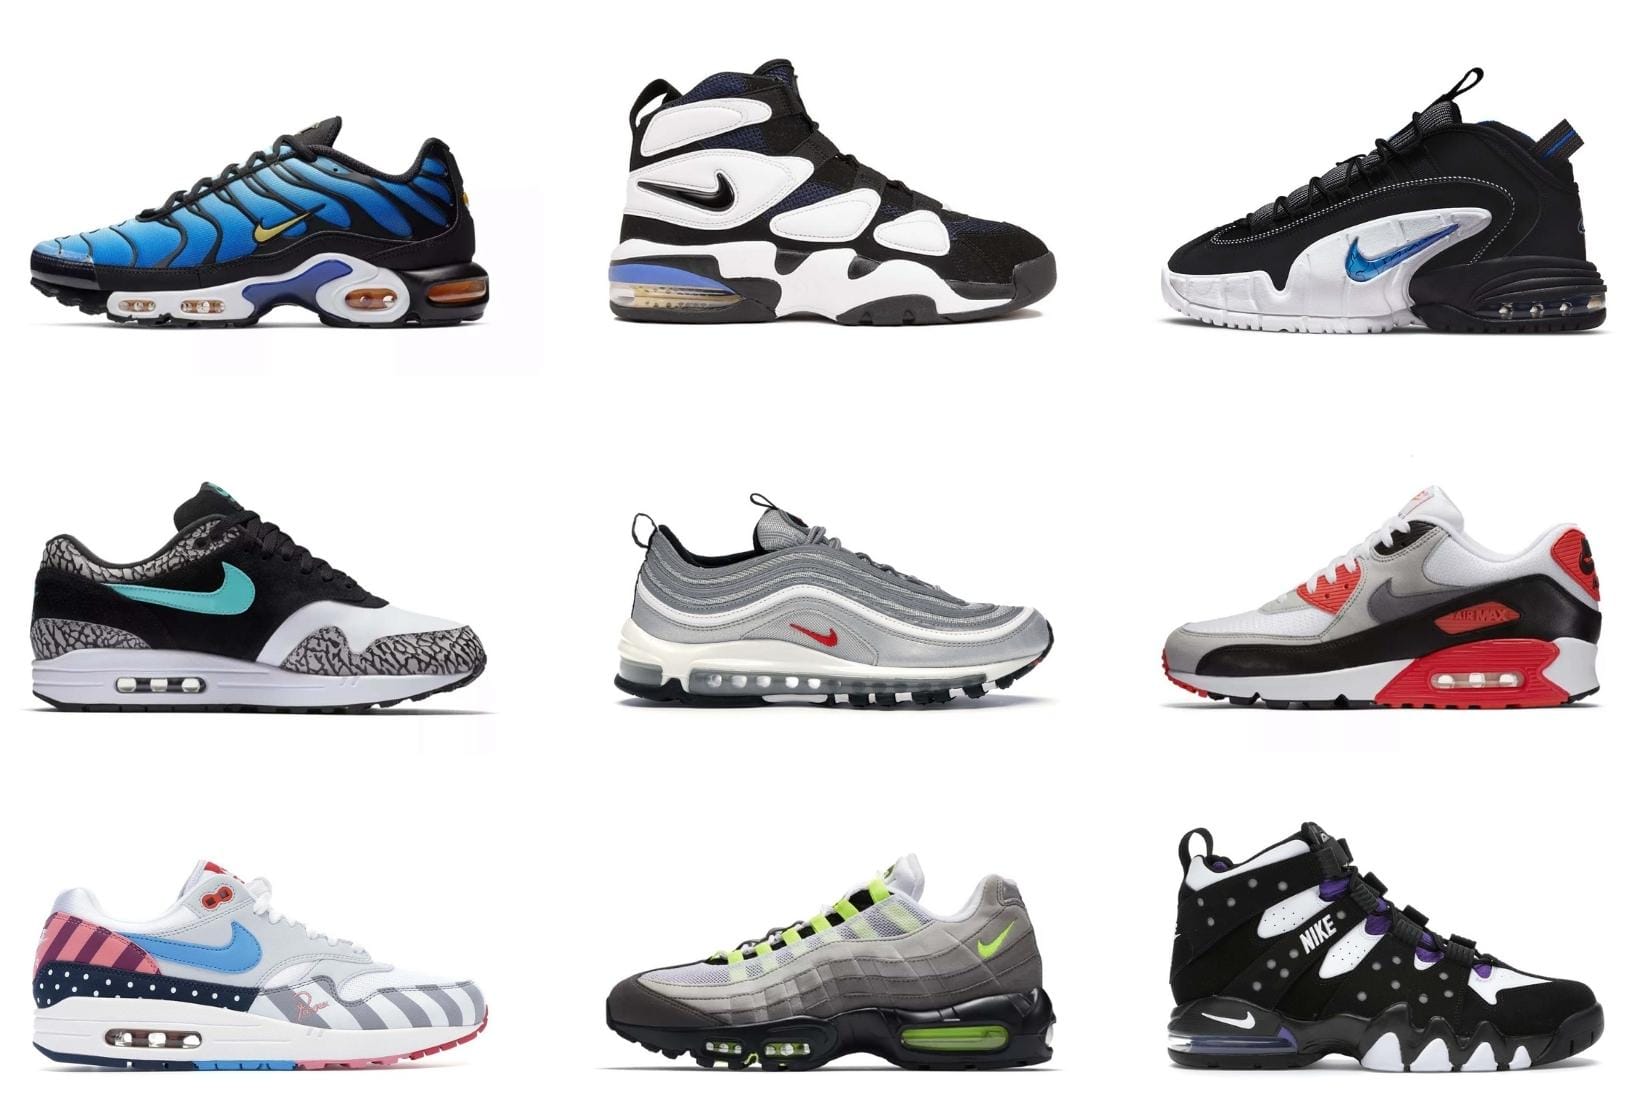 what are the best nike air max